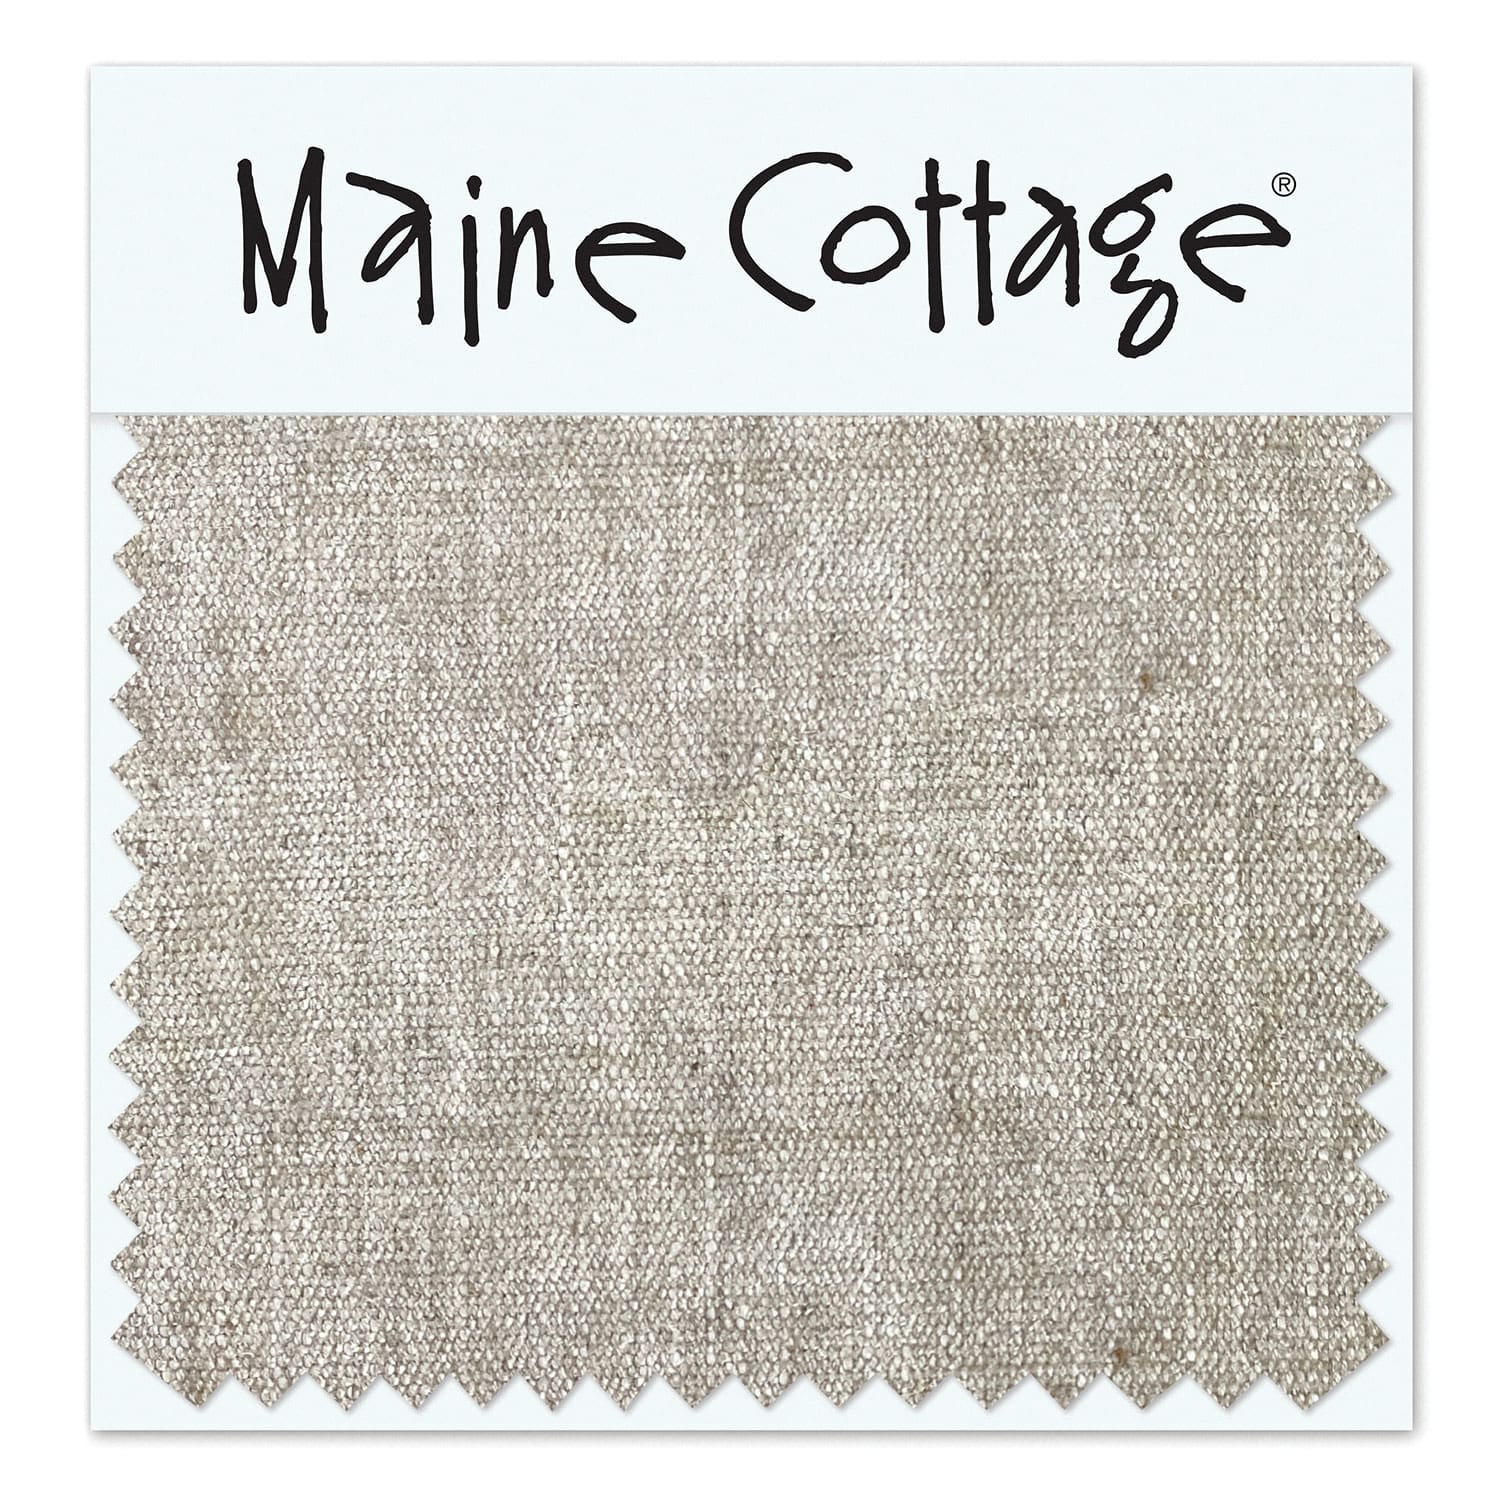 Maine Cottage Pebble Washed: Bisque Fabric Sample | Maine Cottage® 